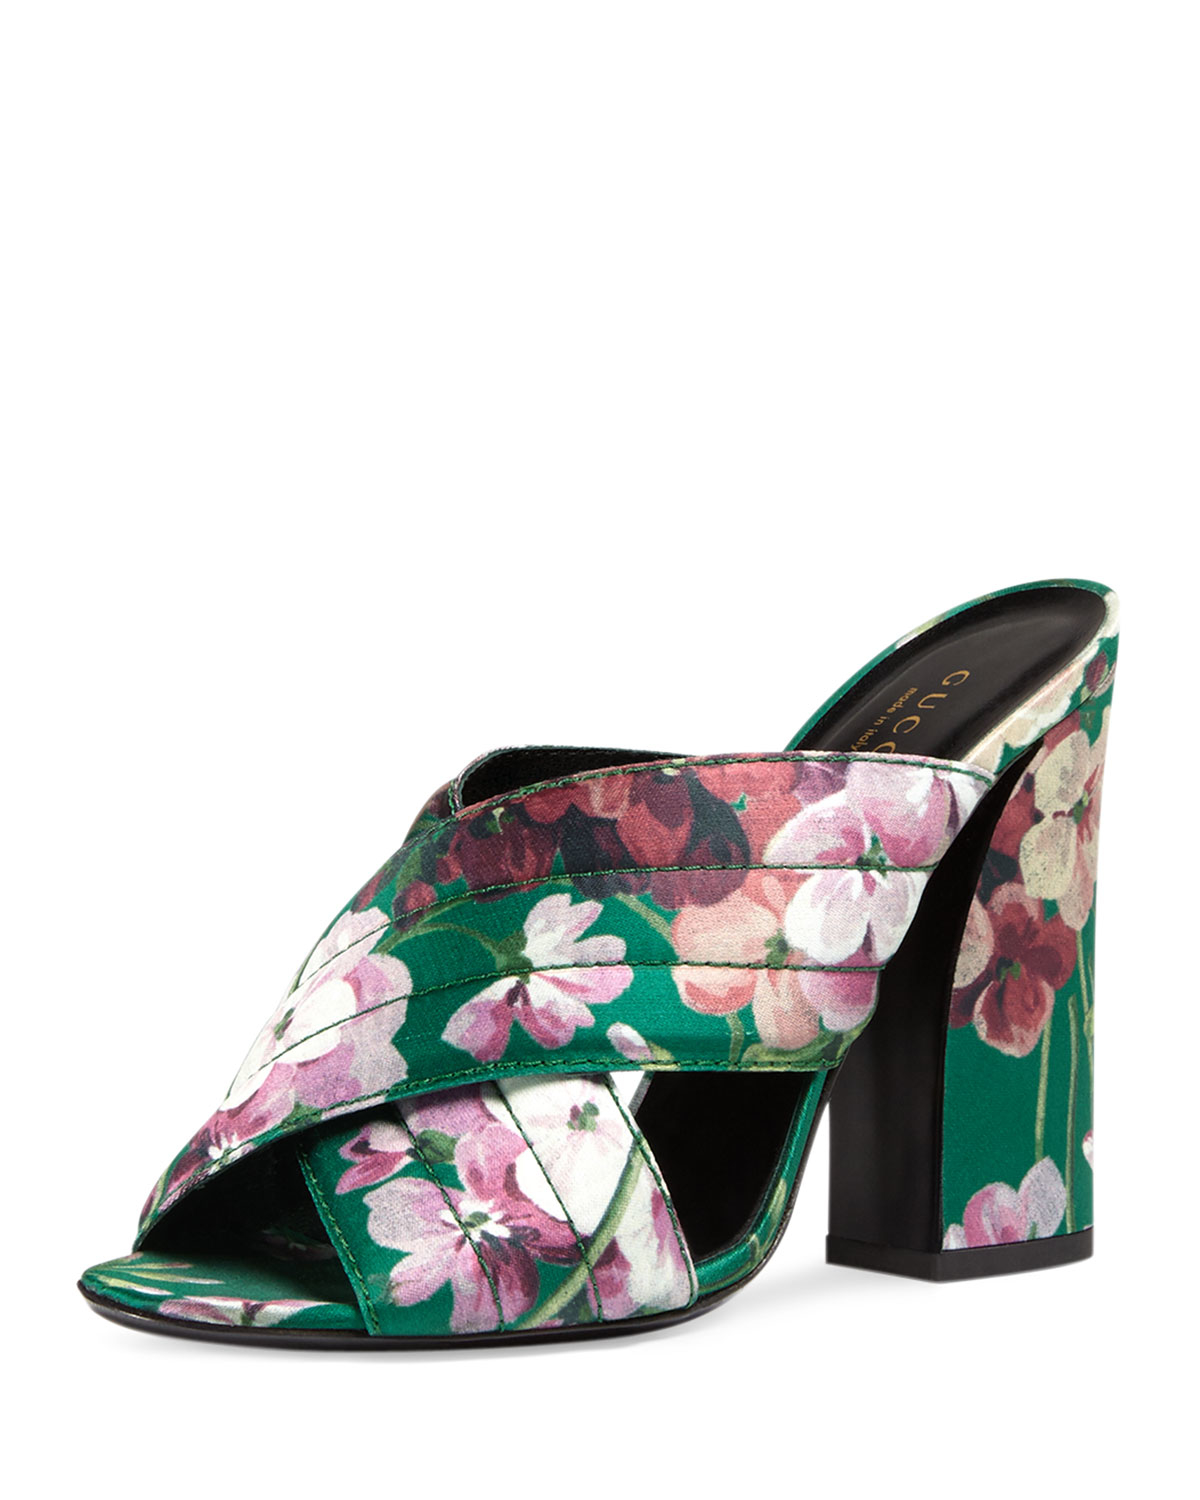  Gucci  Webby Satin Floral Print Sandals  in Green Lyst